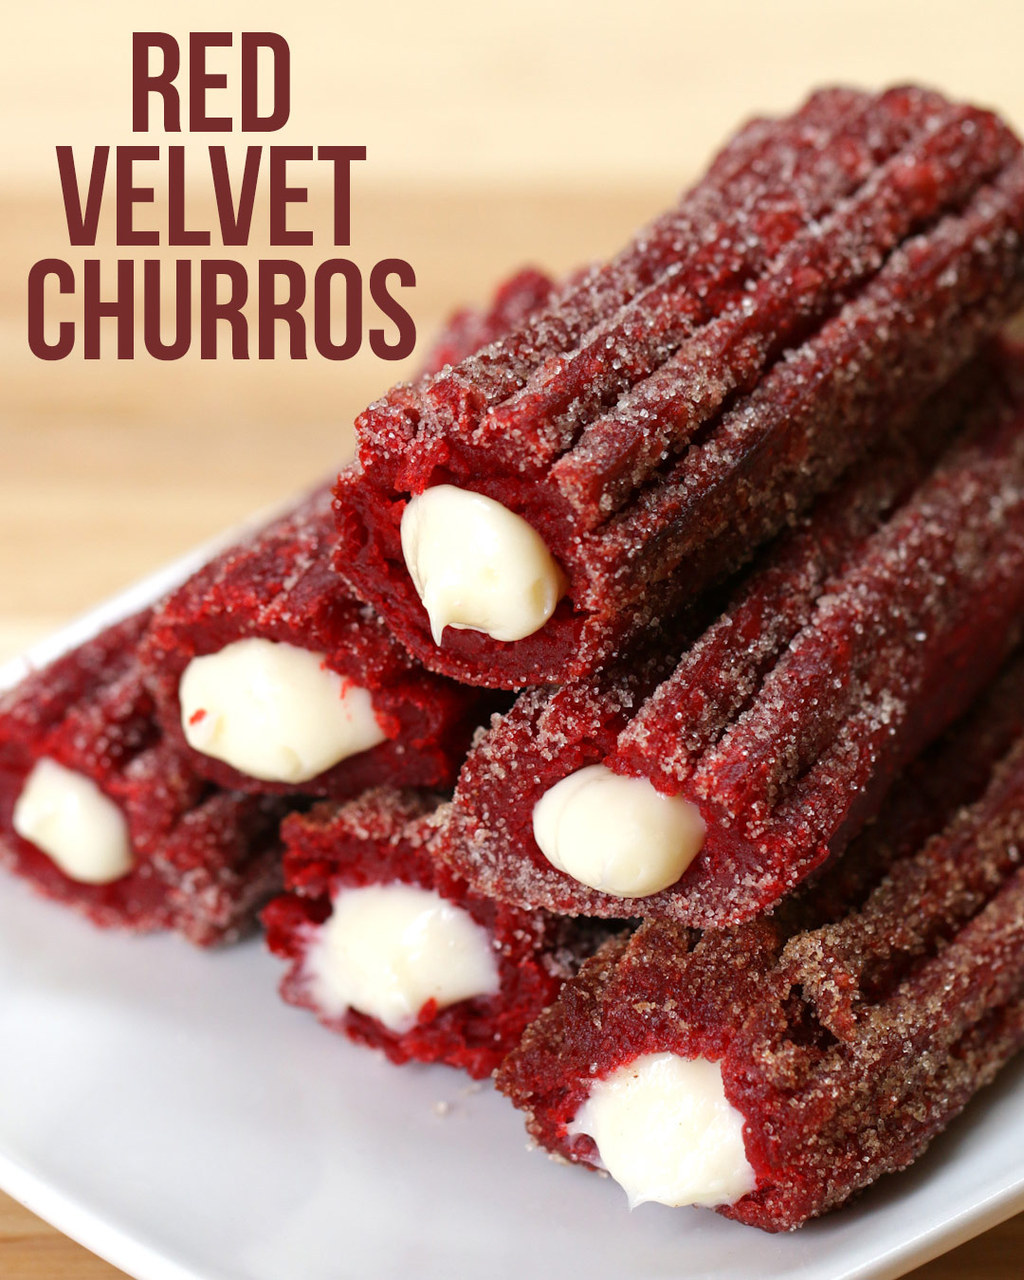 Make Your Life Magical With These Fantastic Red Velvet Churros